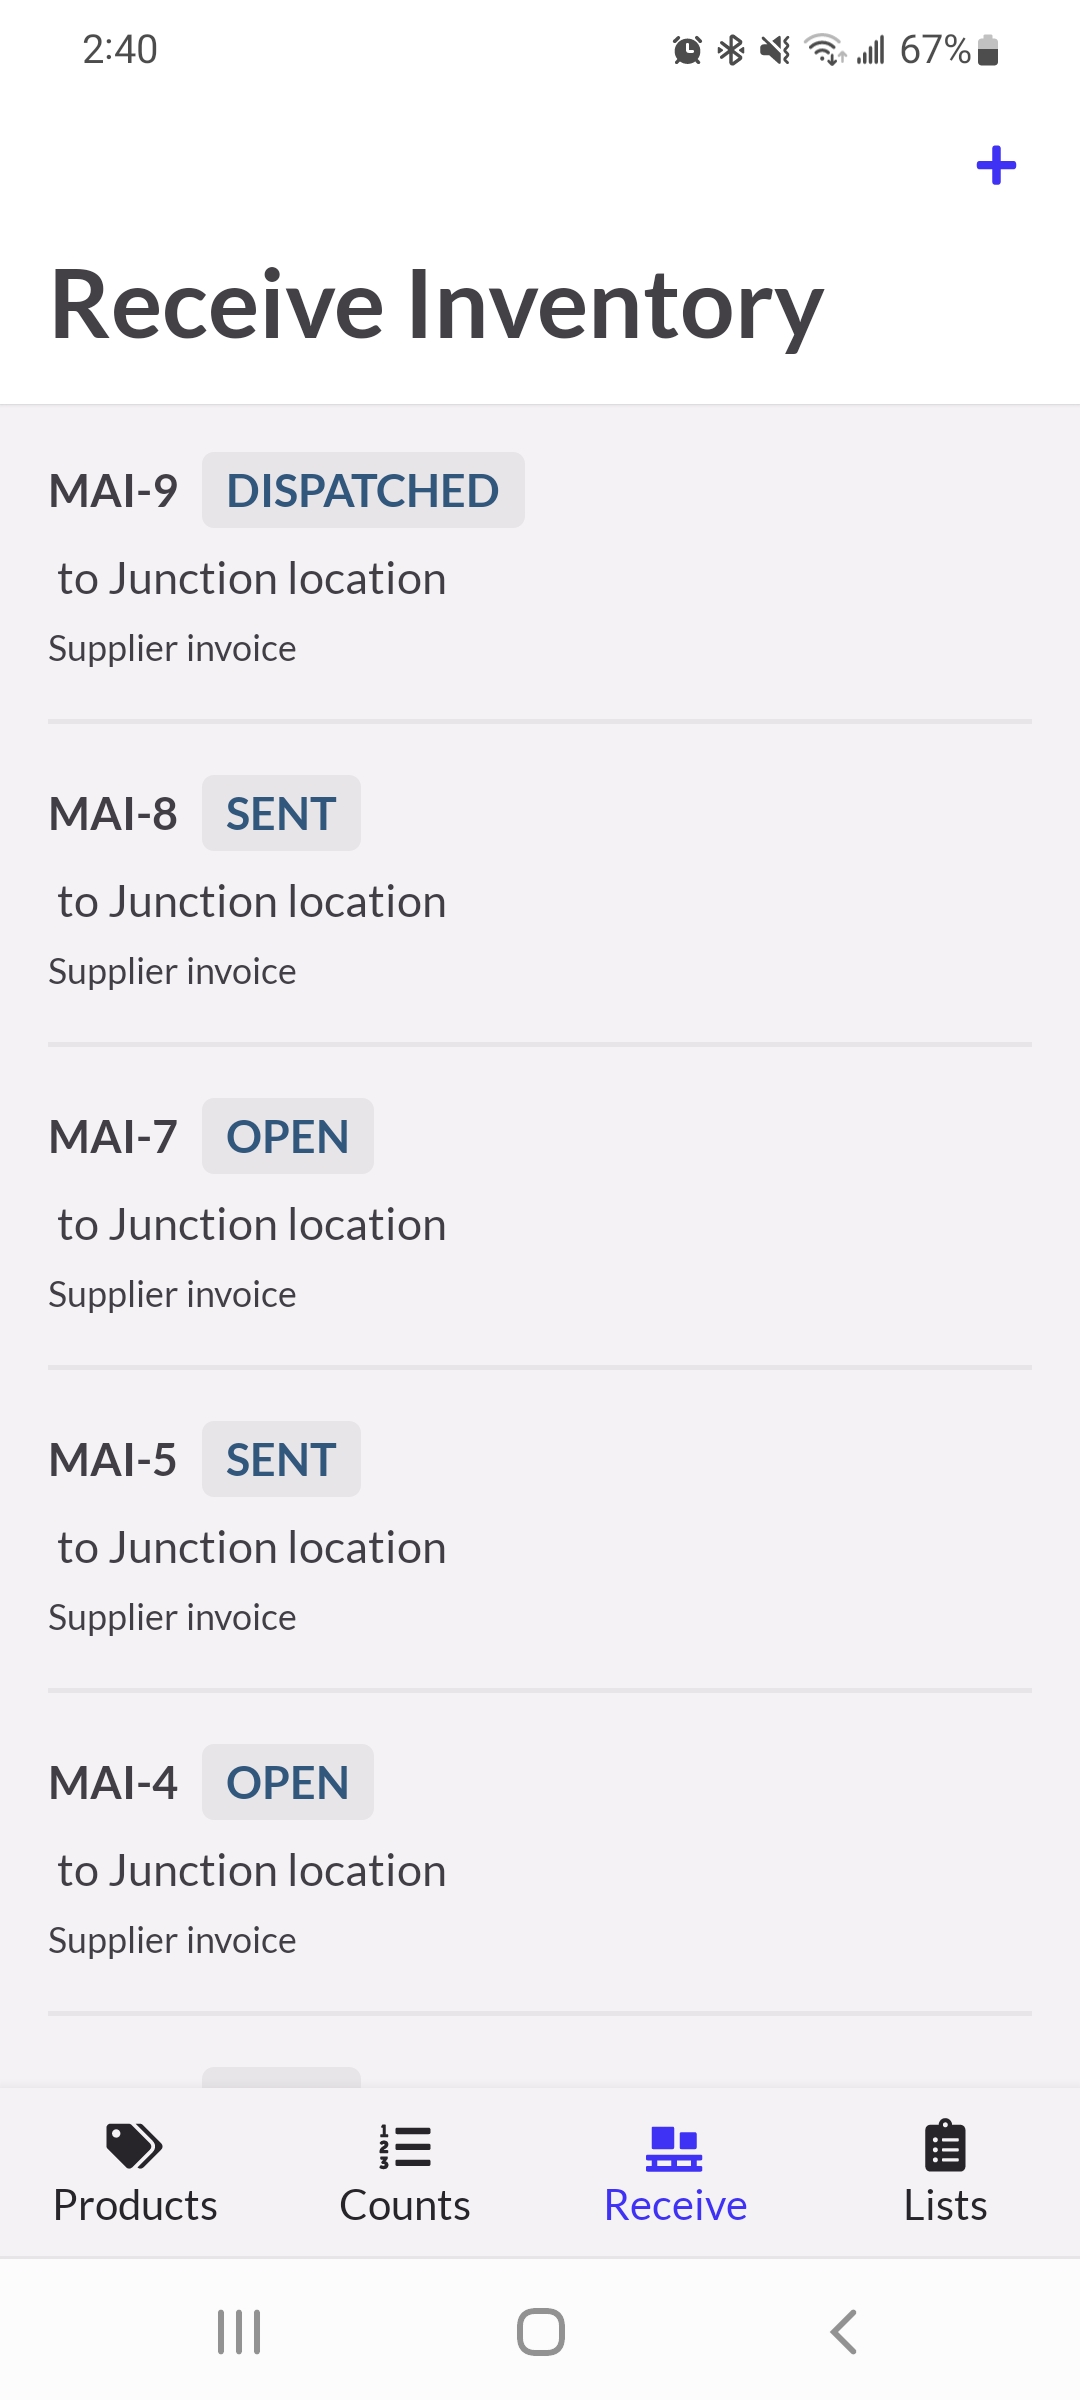 Receive page showing existing orders to receive and the new order button.